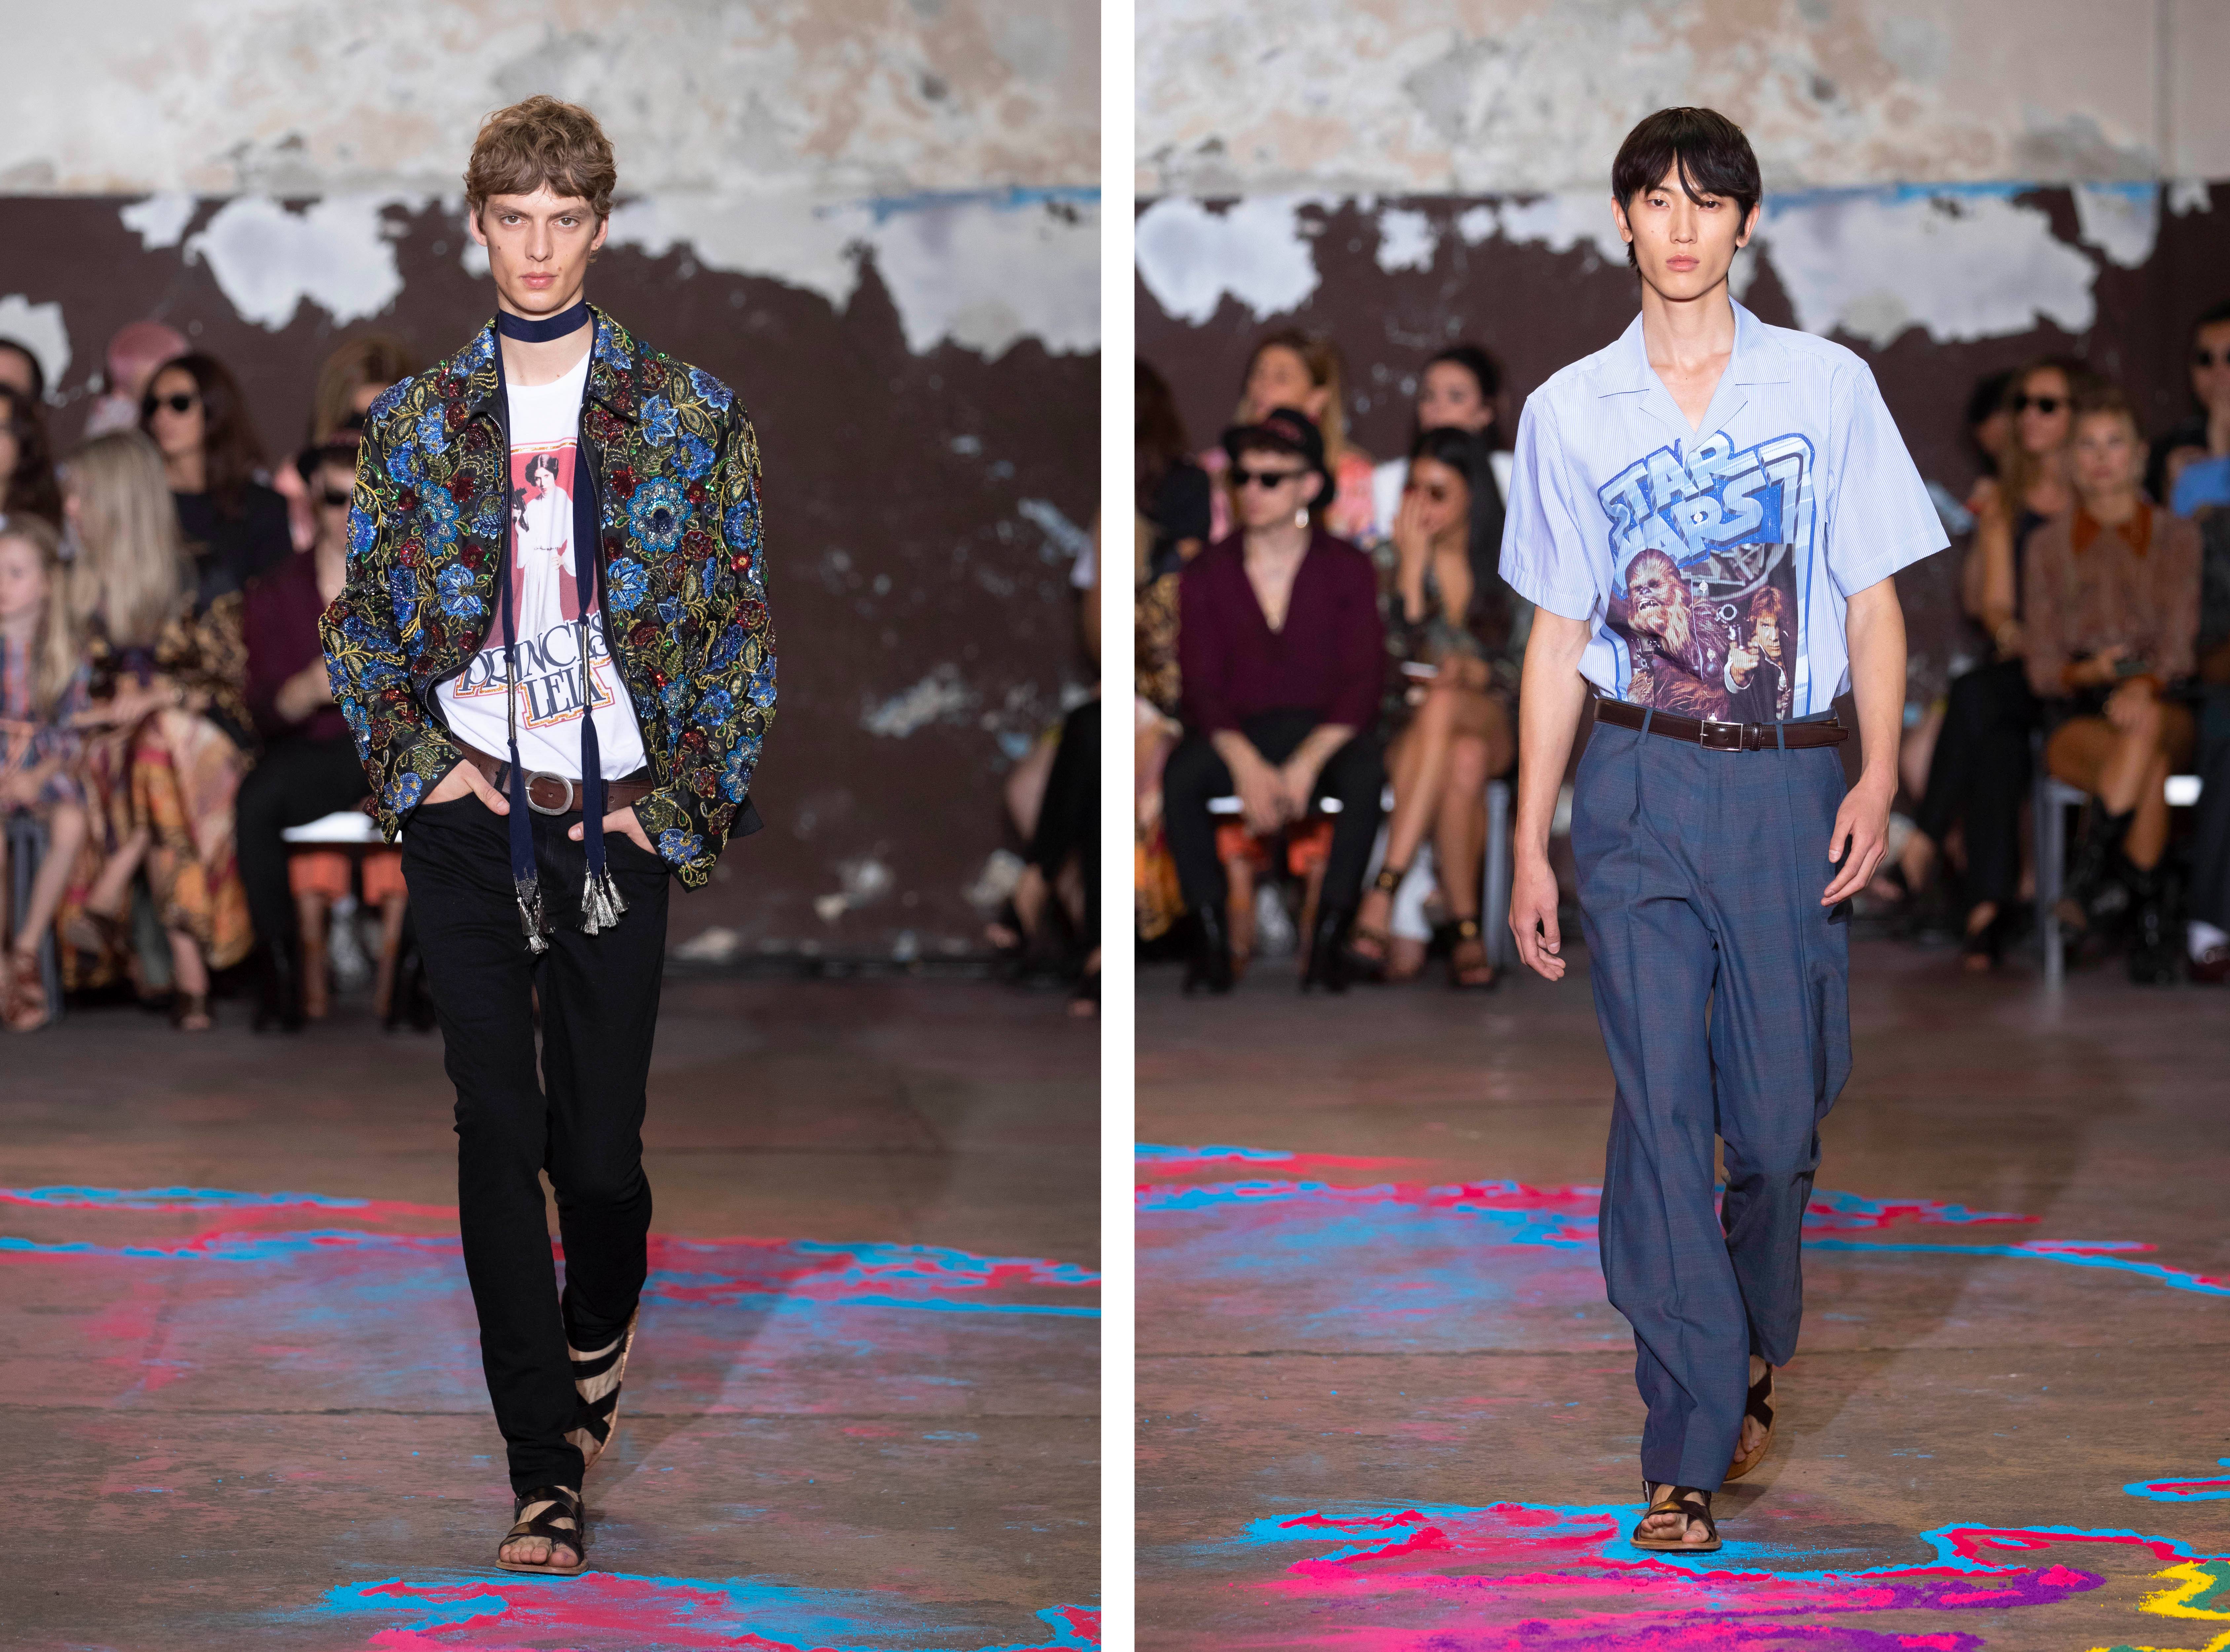 Runway looks from the ETRO X STAR WARS Capsule Collection.